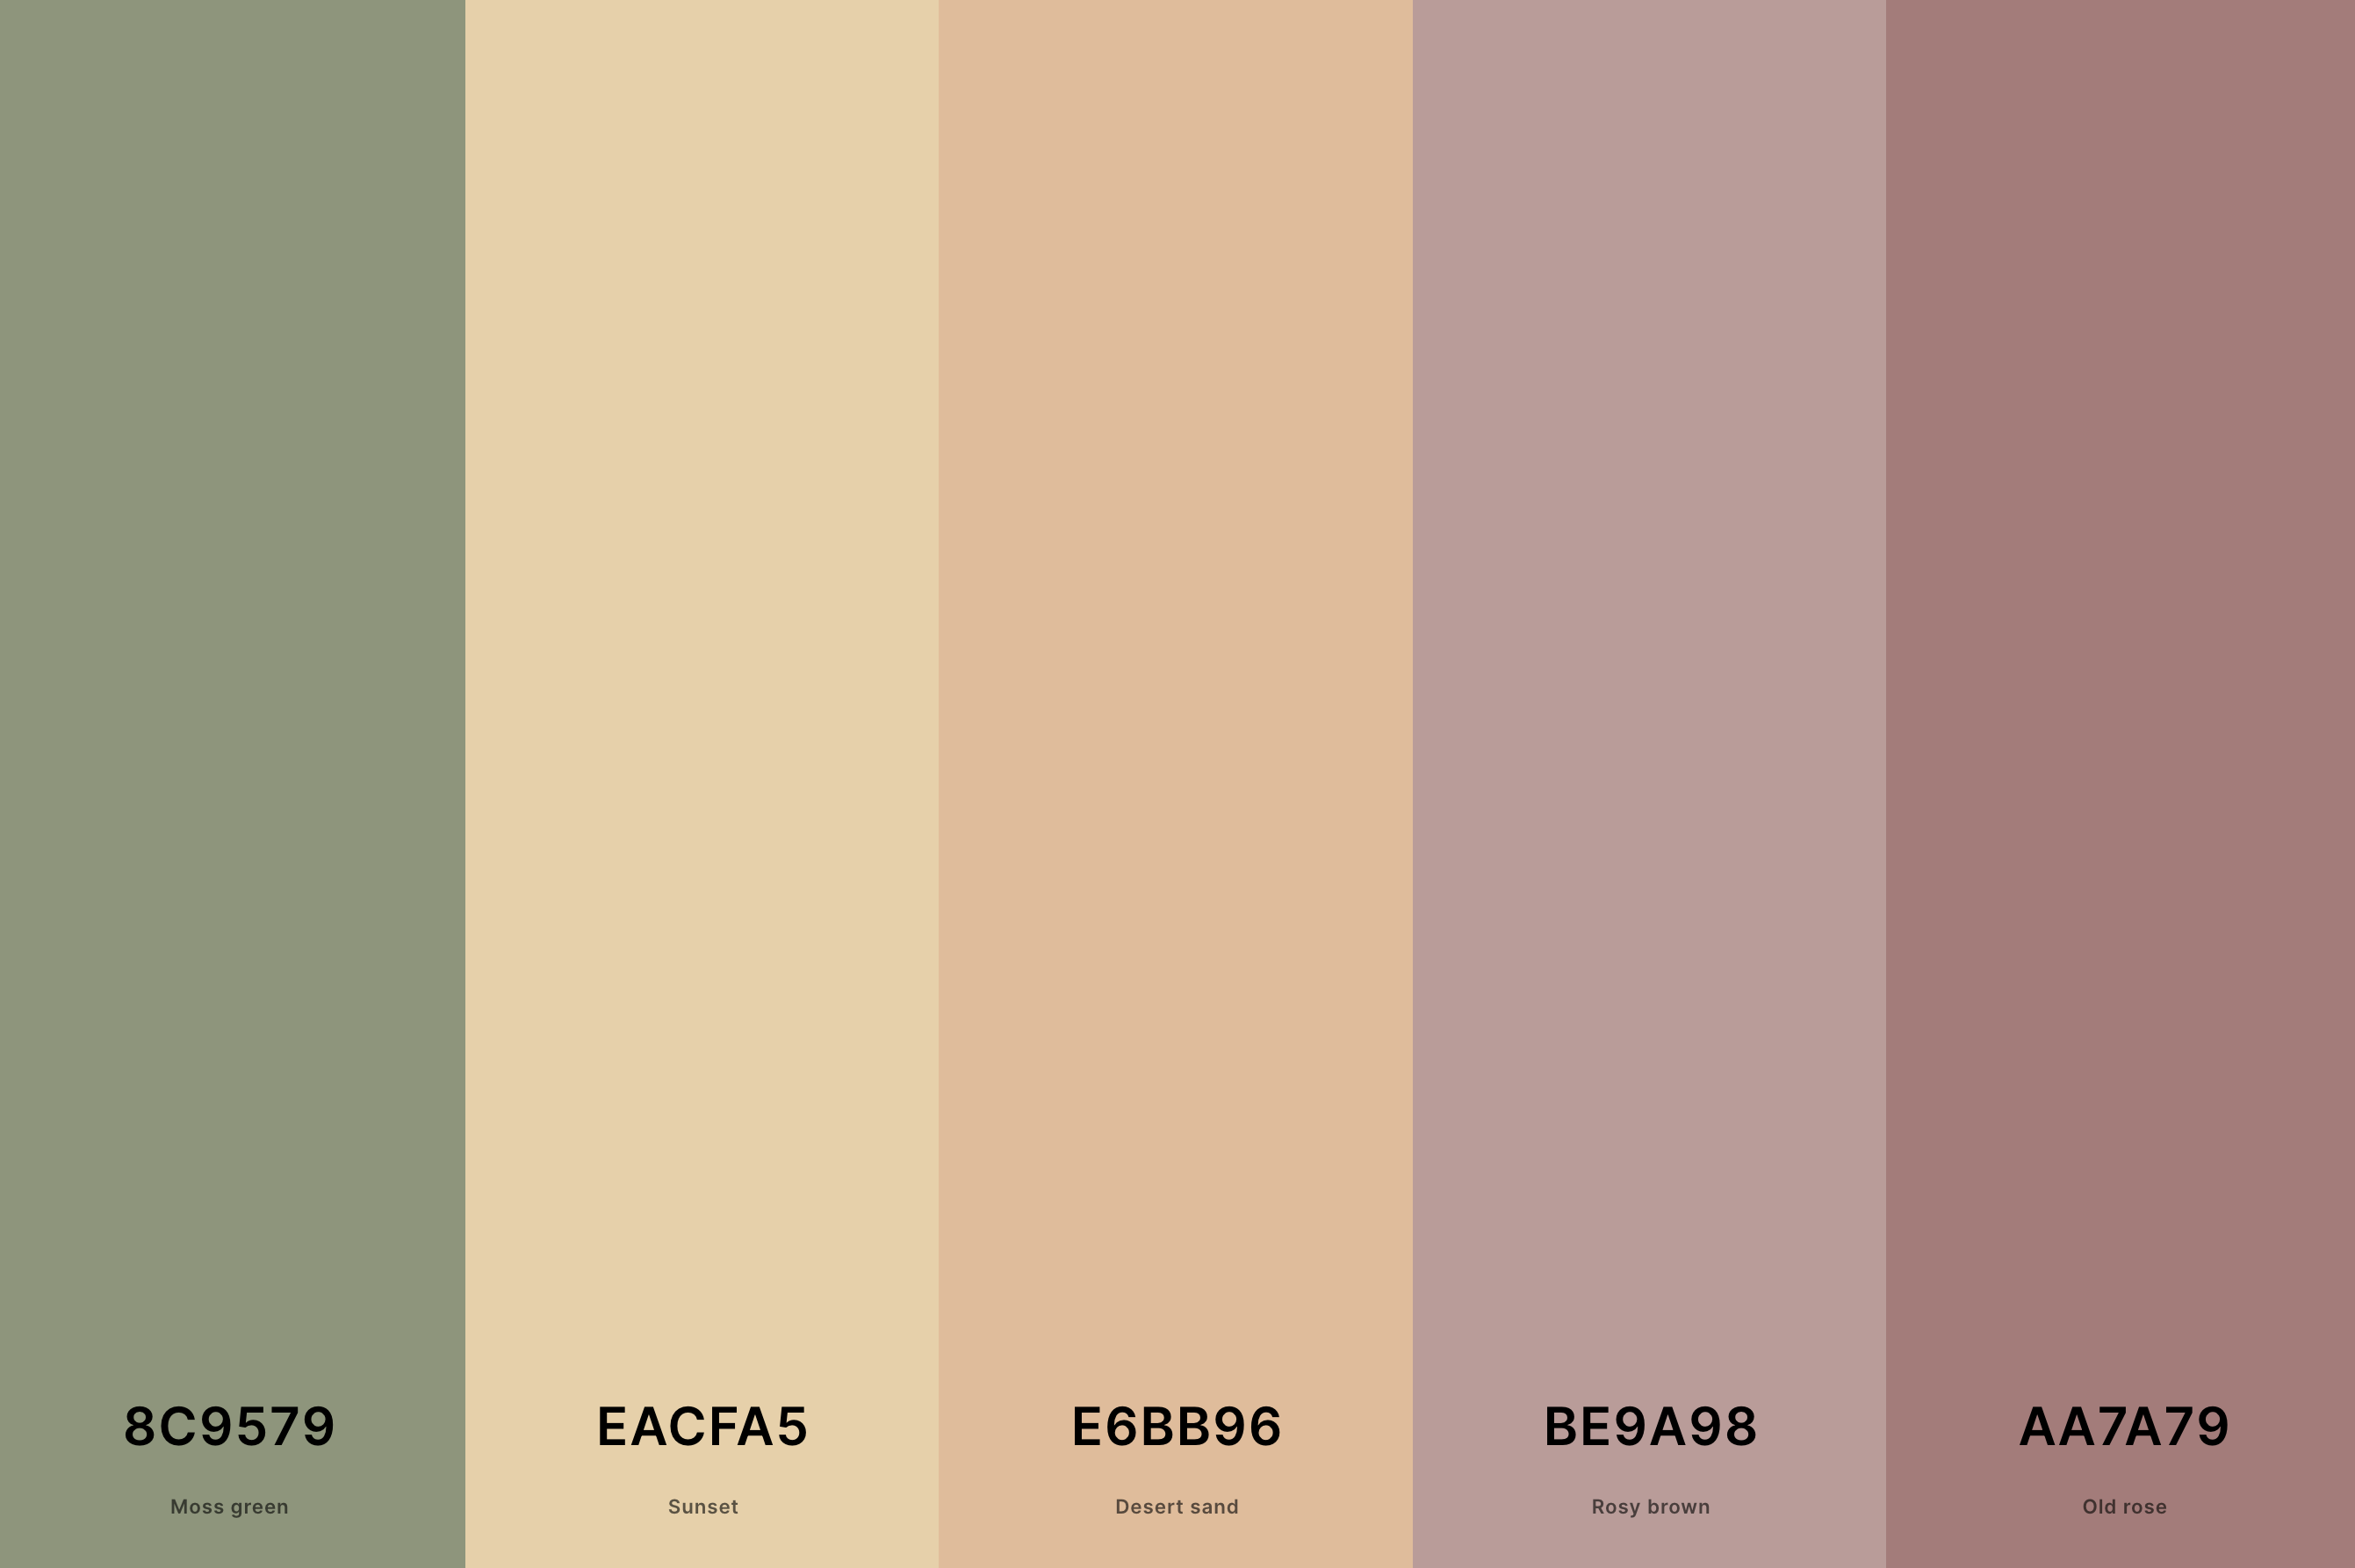 11. Pastel Autumn Color Palette Color Palette with Moss Green (Hex #8C9579) + Sunset (Hex #EACFA5) + Desert Sand (Hex #E6BB96) + Rosy Brown (Hex #BE9A98) + Old Rose (Hex #AA7A79) Color Palette with Hex Codes